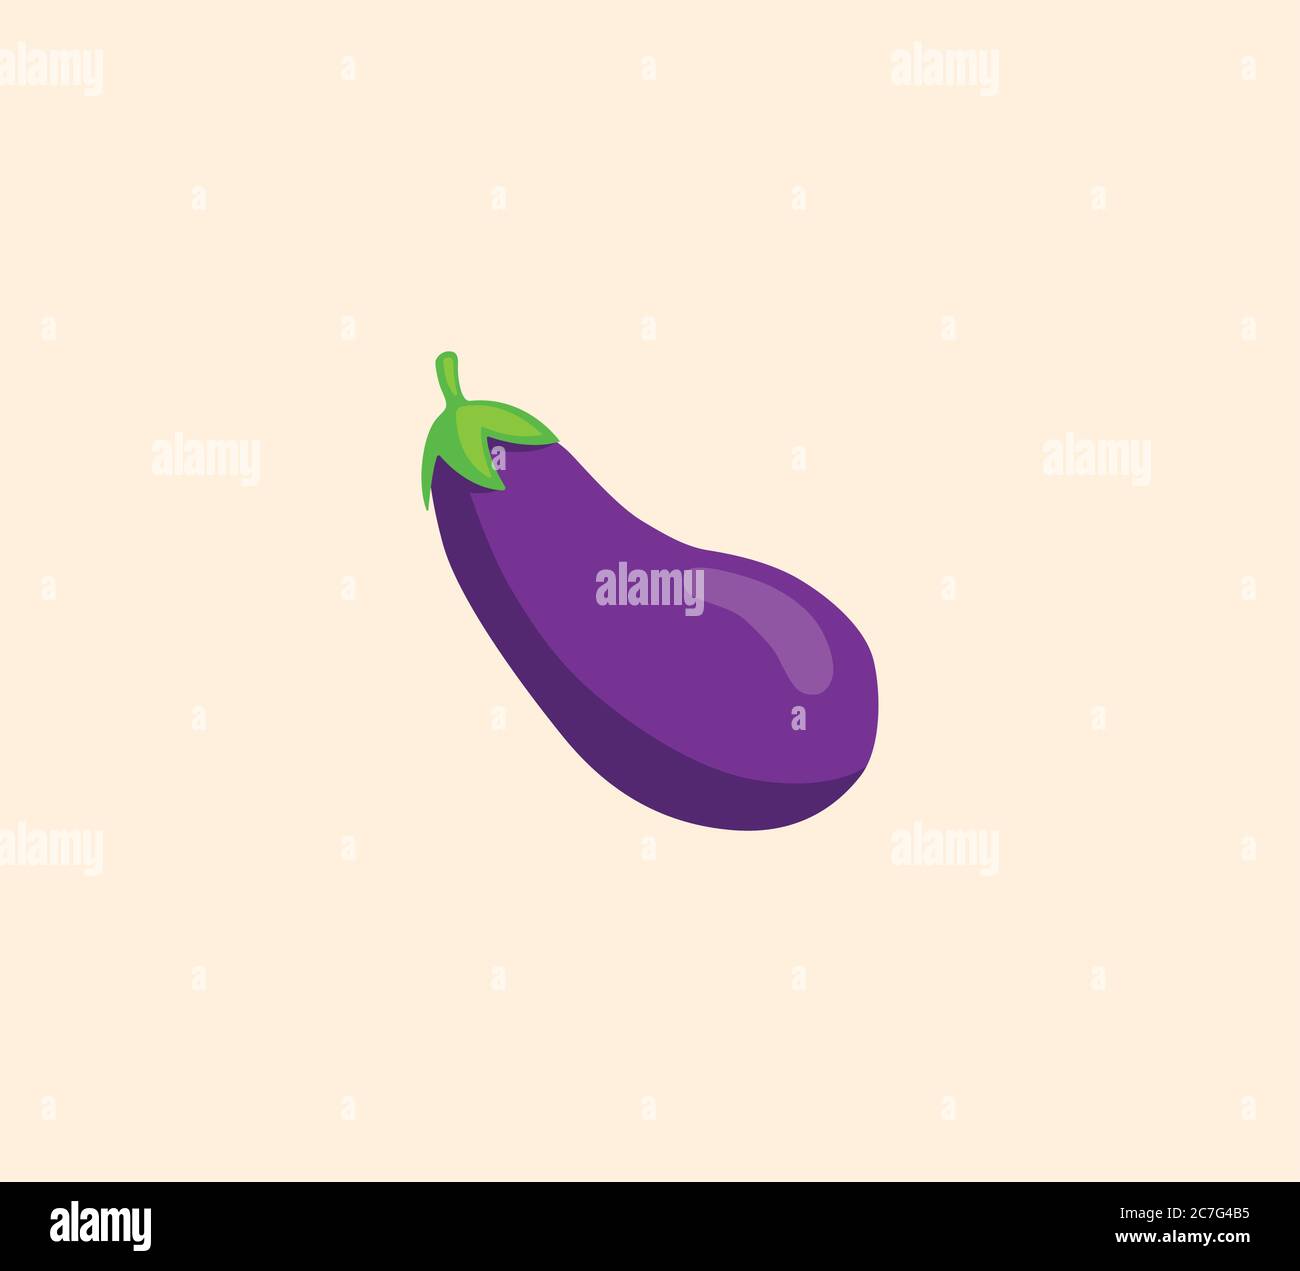 Emoji Icon High Resolution Stock Photography and Images - Alamy